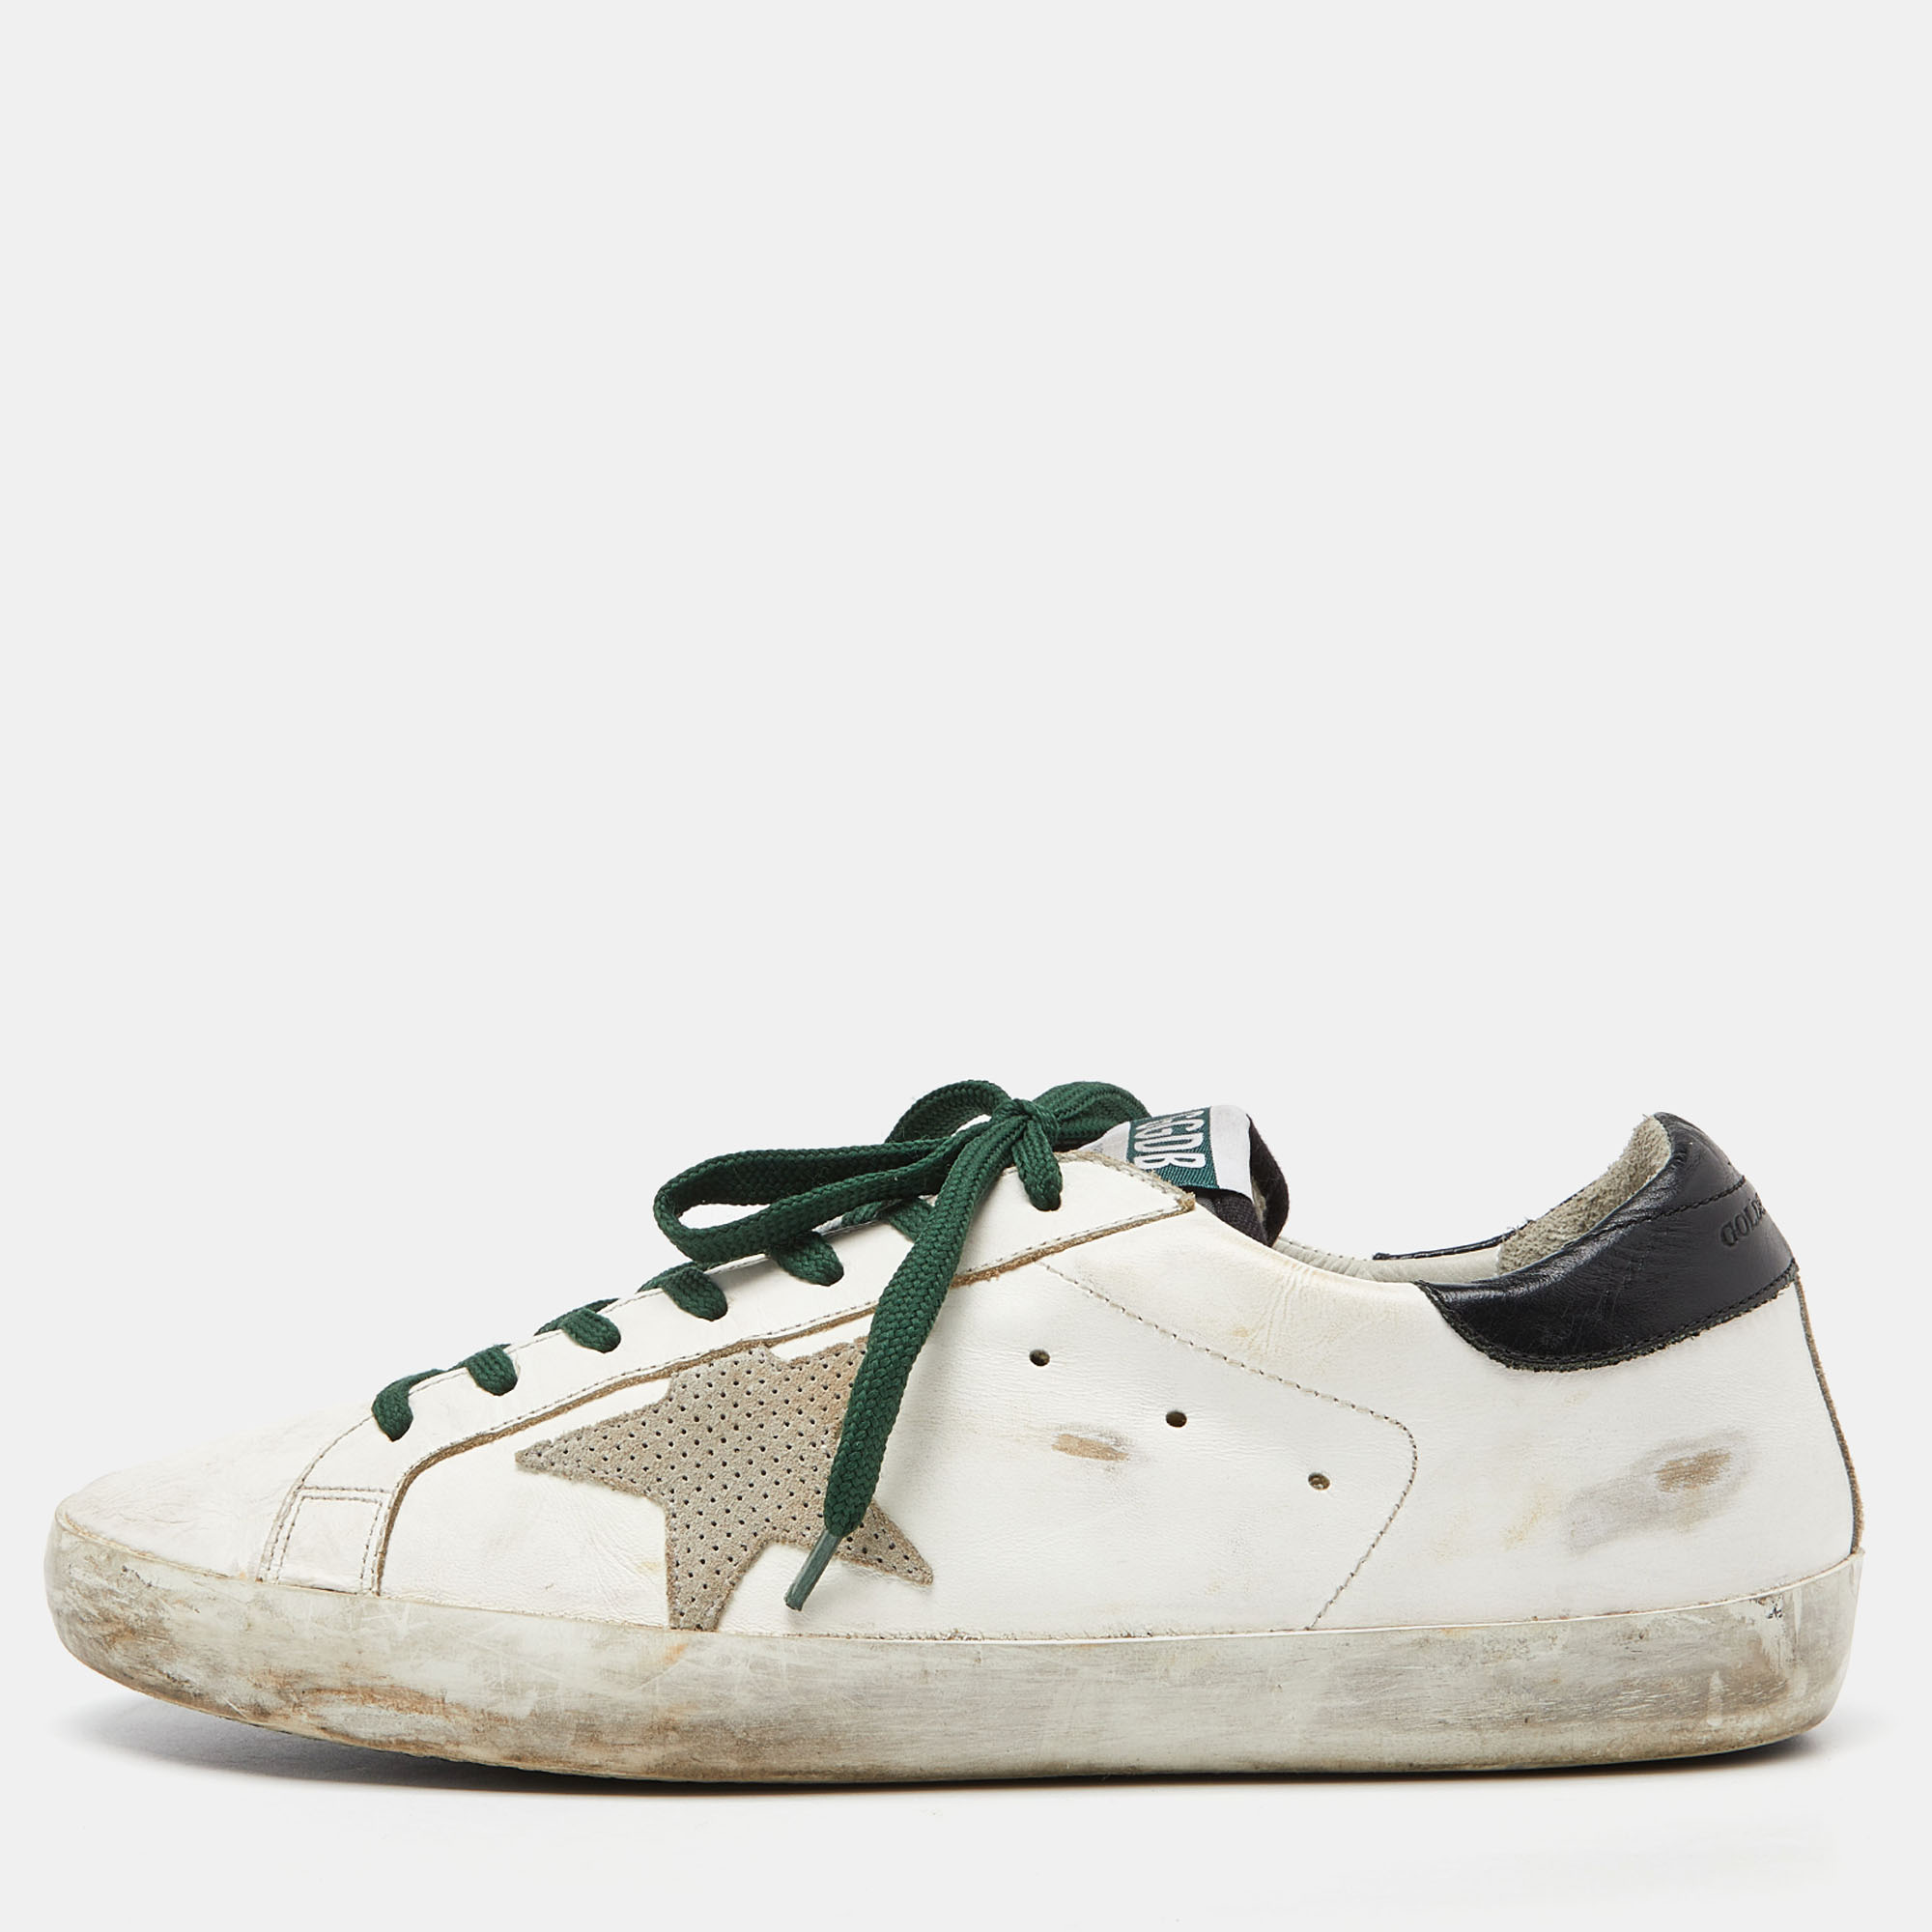 The white sneakers offer a wave of comfort. The Golden Goose sneakers have been crafted with suede as well as leather and they are easy to slip on. The trendy shoes feature star details lace ups and the comfortable insoles make them ideal to wear through all seasons.